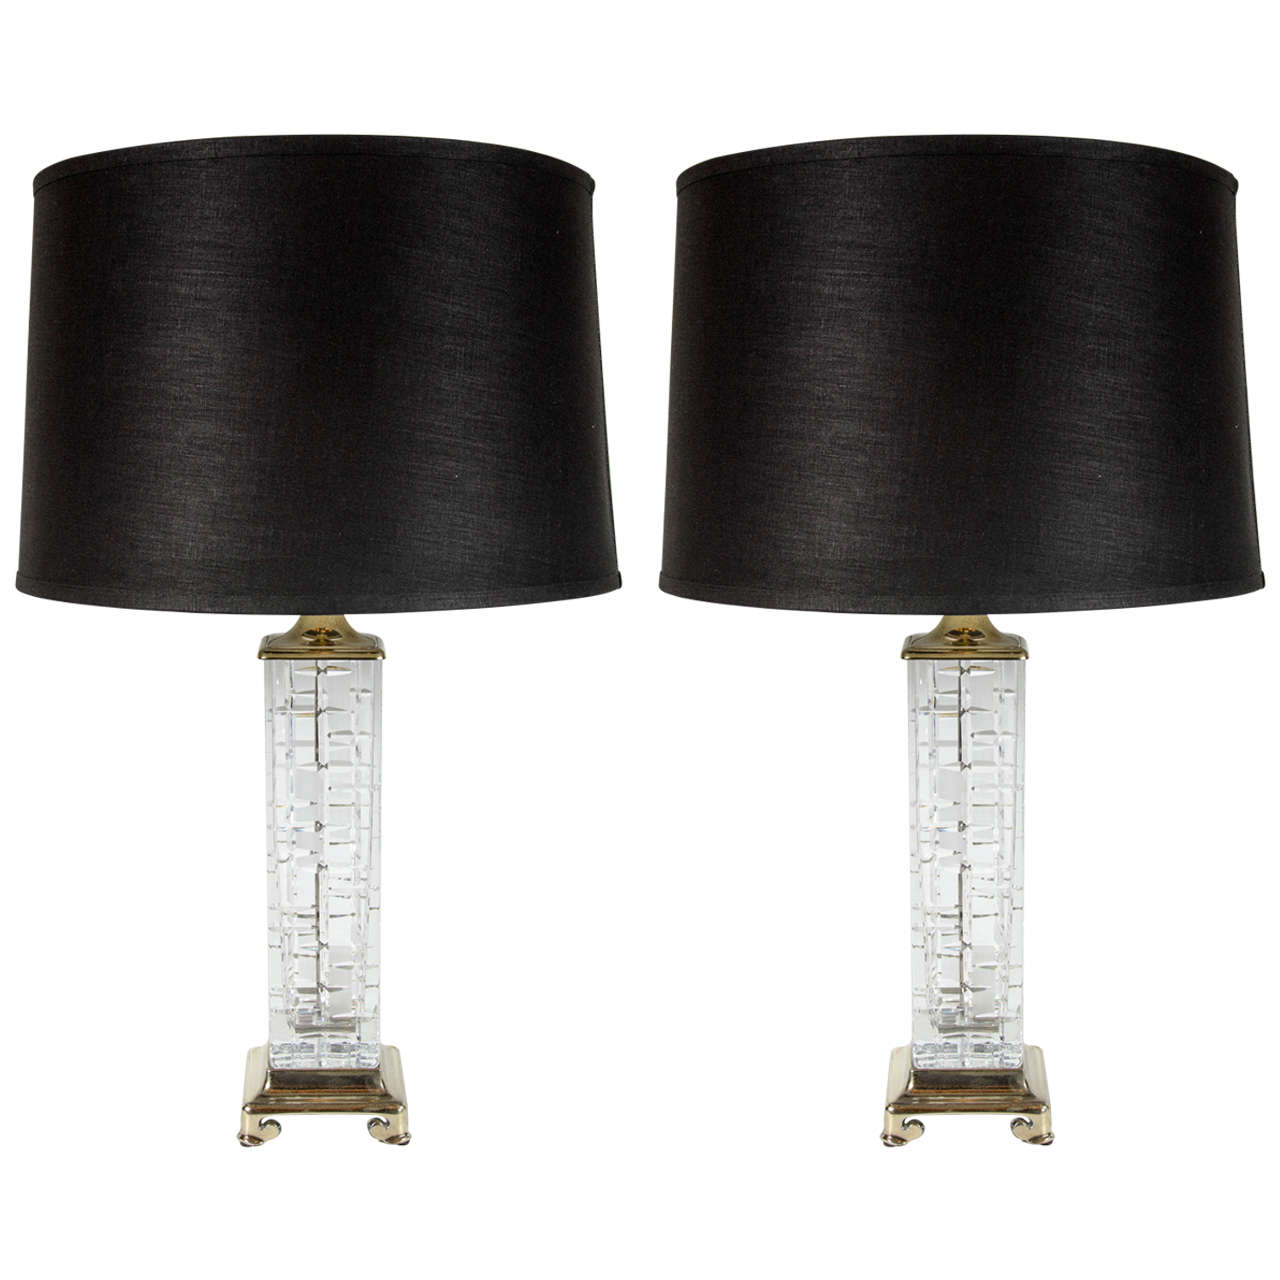 Brilliant Pair of Mid-Century Modern Etched Crystal Lamps by Geyer Dresden